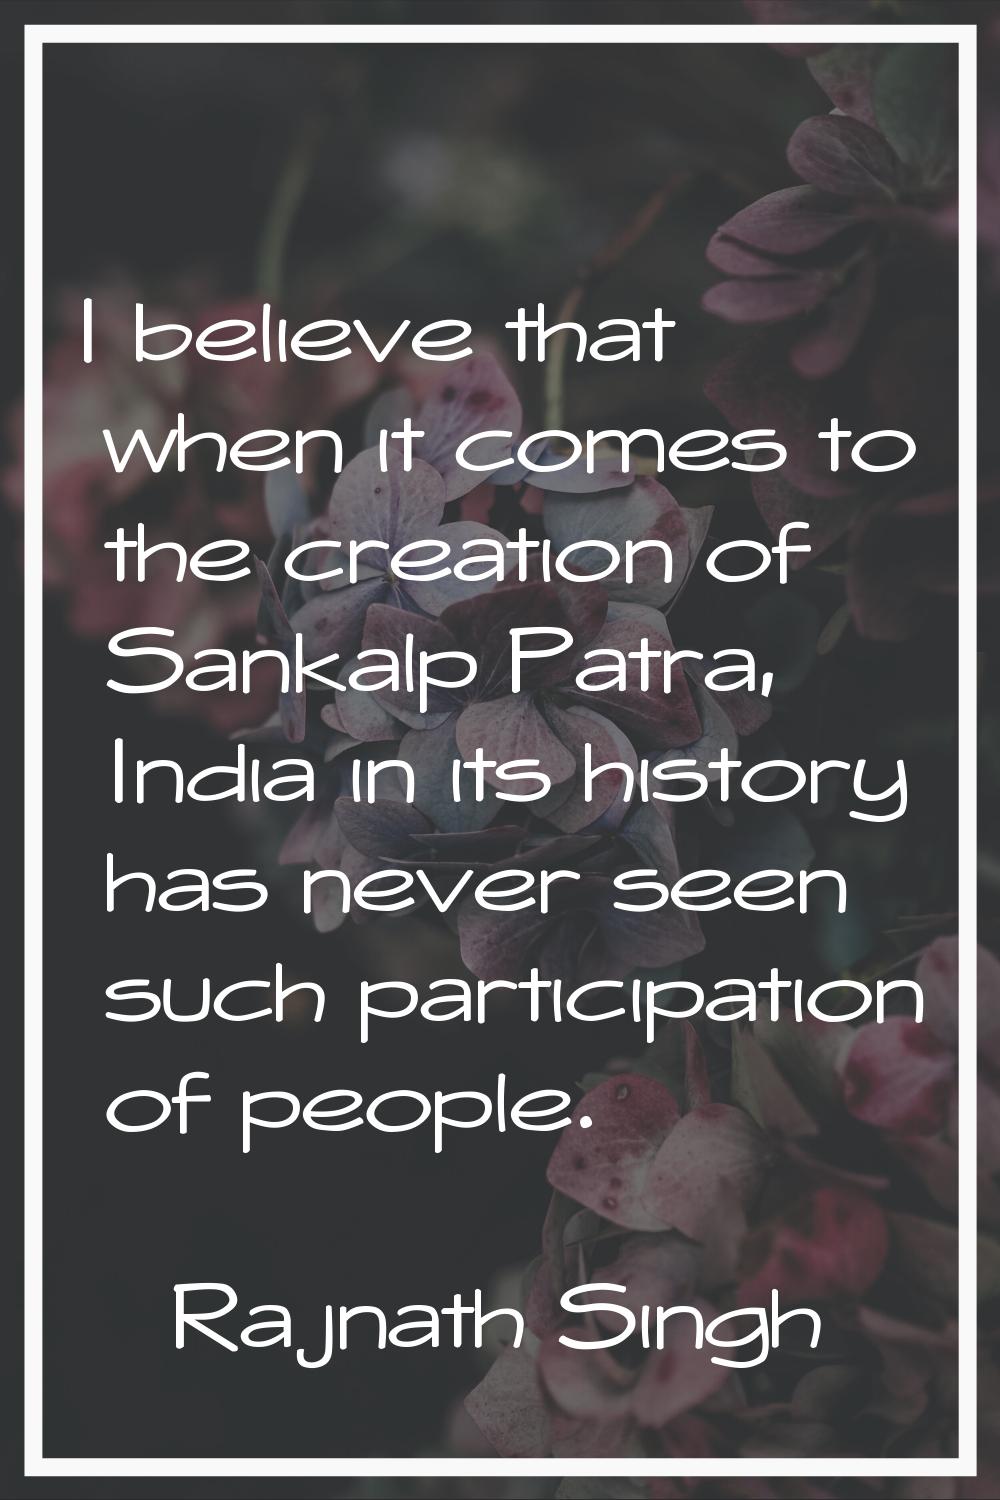 I believe that when it comes to the creation of Sankalp Patra, India in its history has never seen 